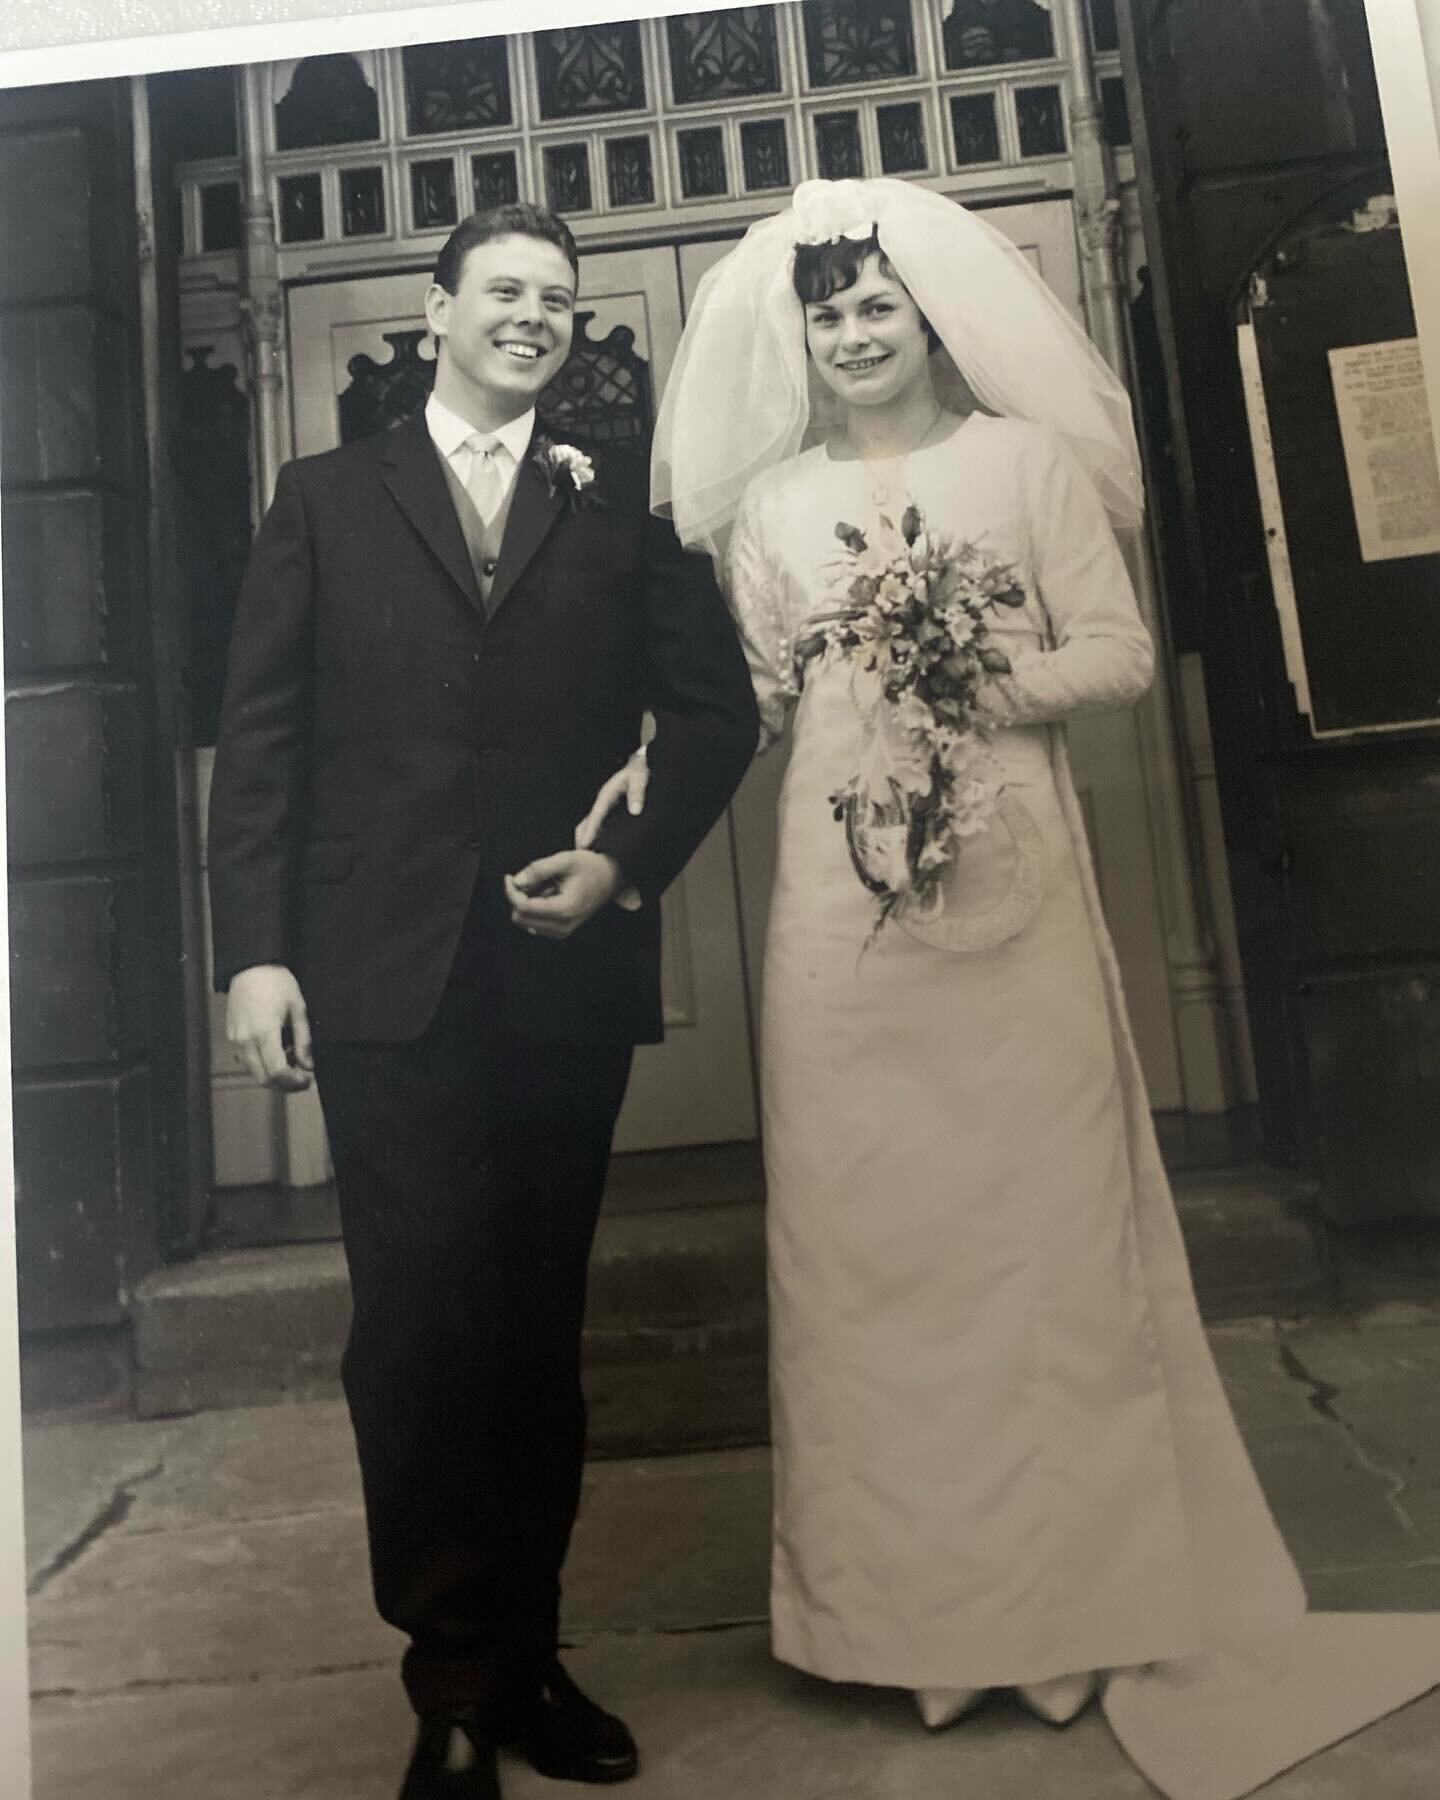 Weddings in the 60&rsquo;s. 

My grandparents got married 59 years ago today. Over a cup of tea I asked them a few questions about their wedding day, what it was like, what they did. 

They had 100 guests at a small church in the centre of Bath where